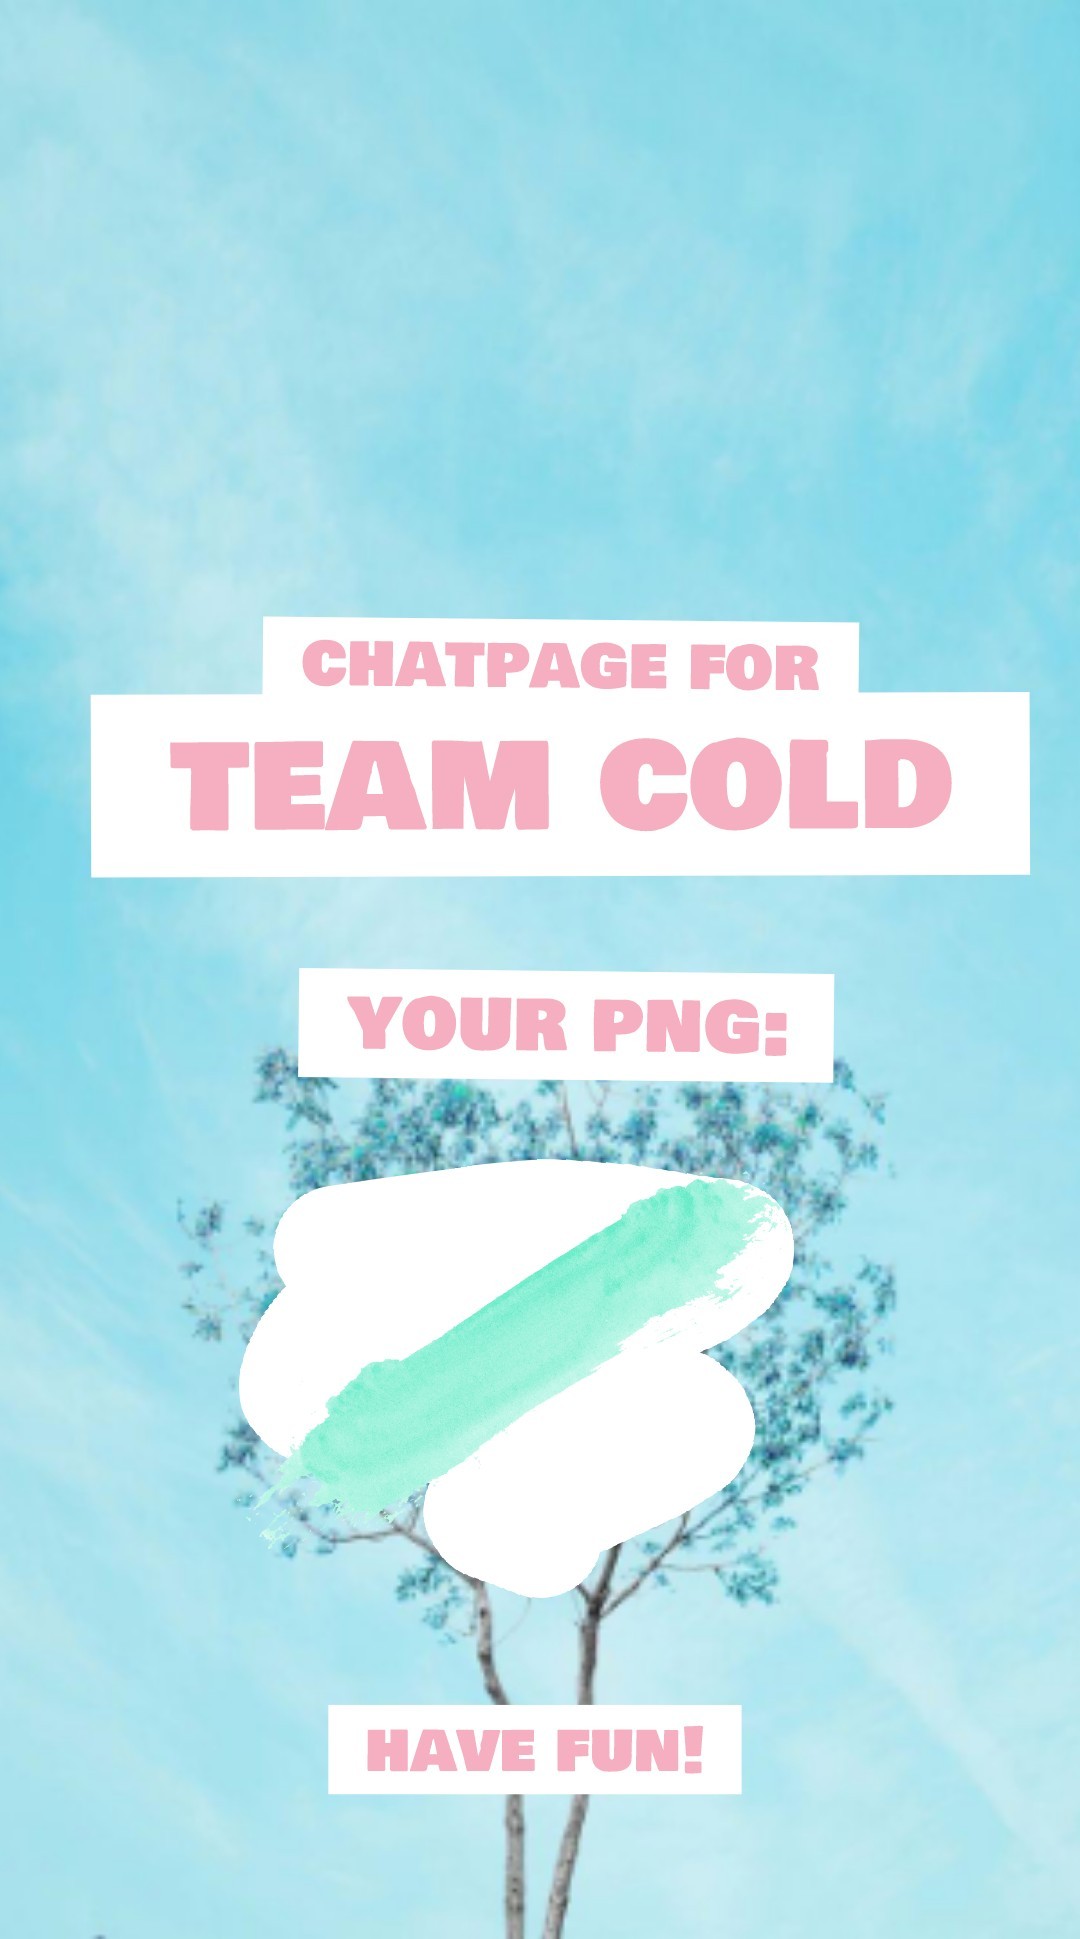 ~🐳~

chatpage for team cold!

have fun

~🐳~